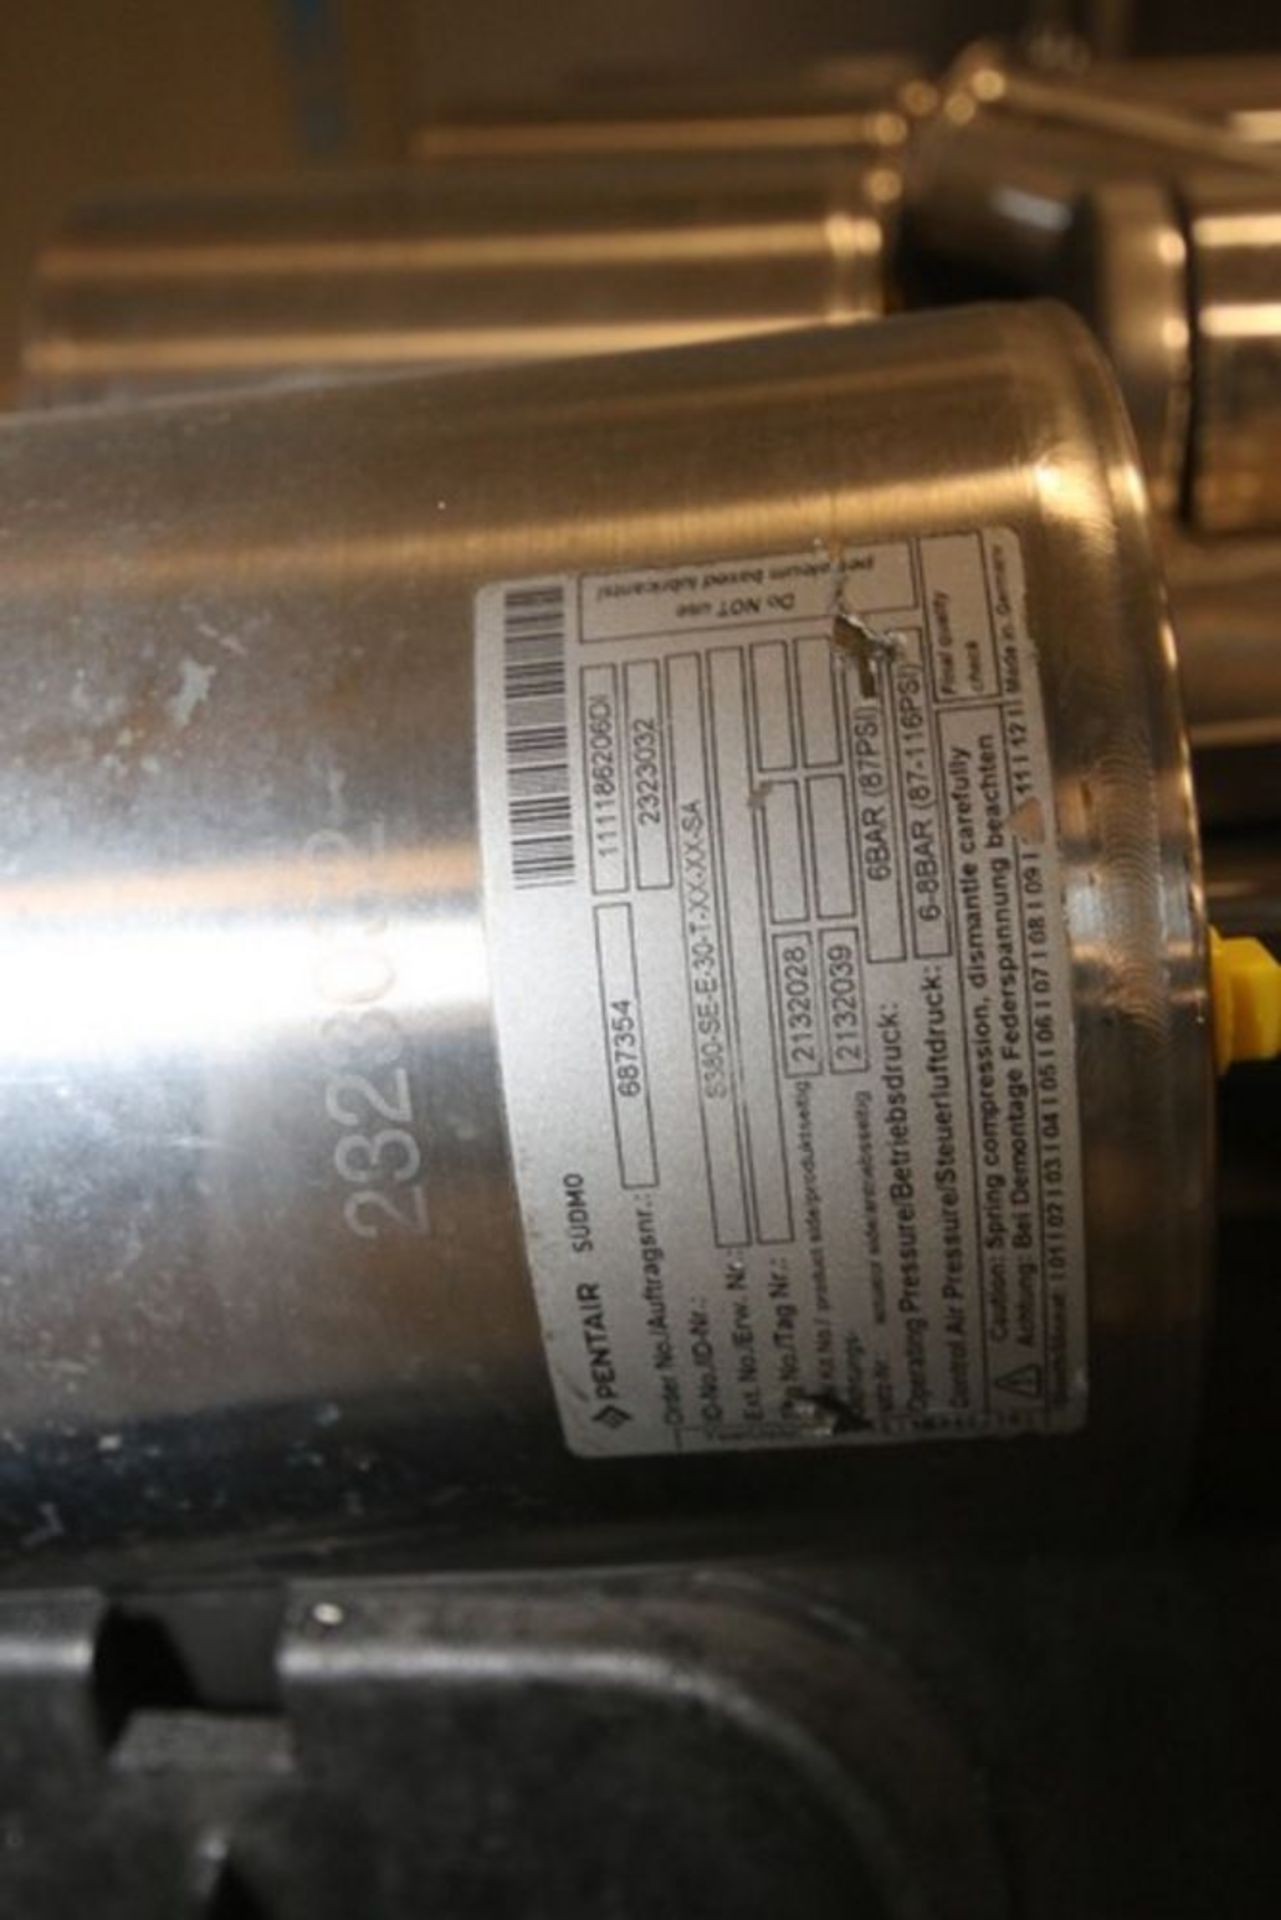 Pentair Sudmo S/S 3" Air Valves, Order No.; 687354 (INV#70270) (Located at the MDG Auction Showroom) - Image 6 of 7